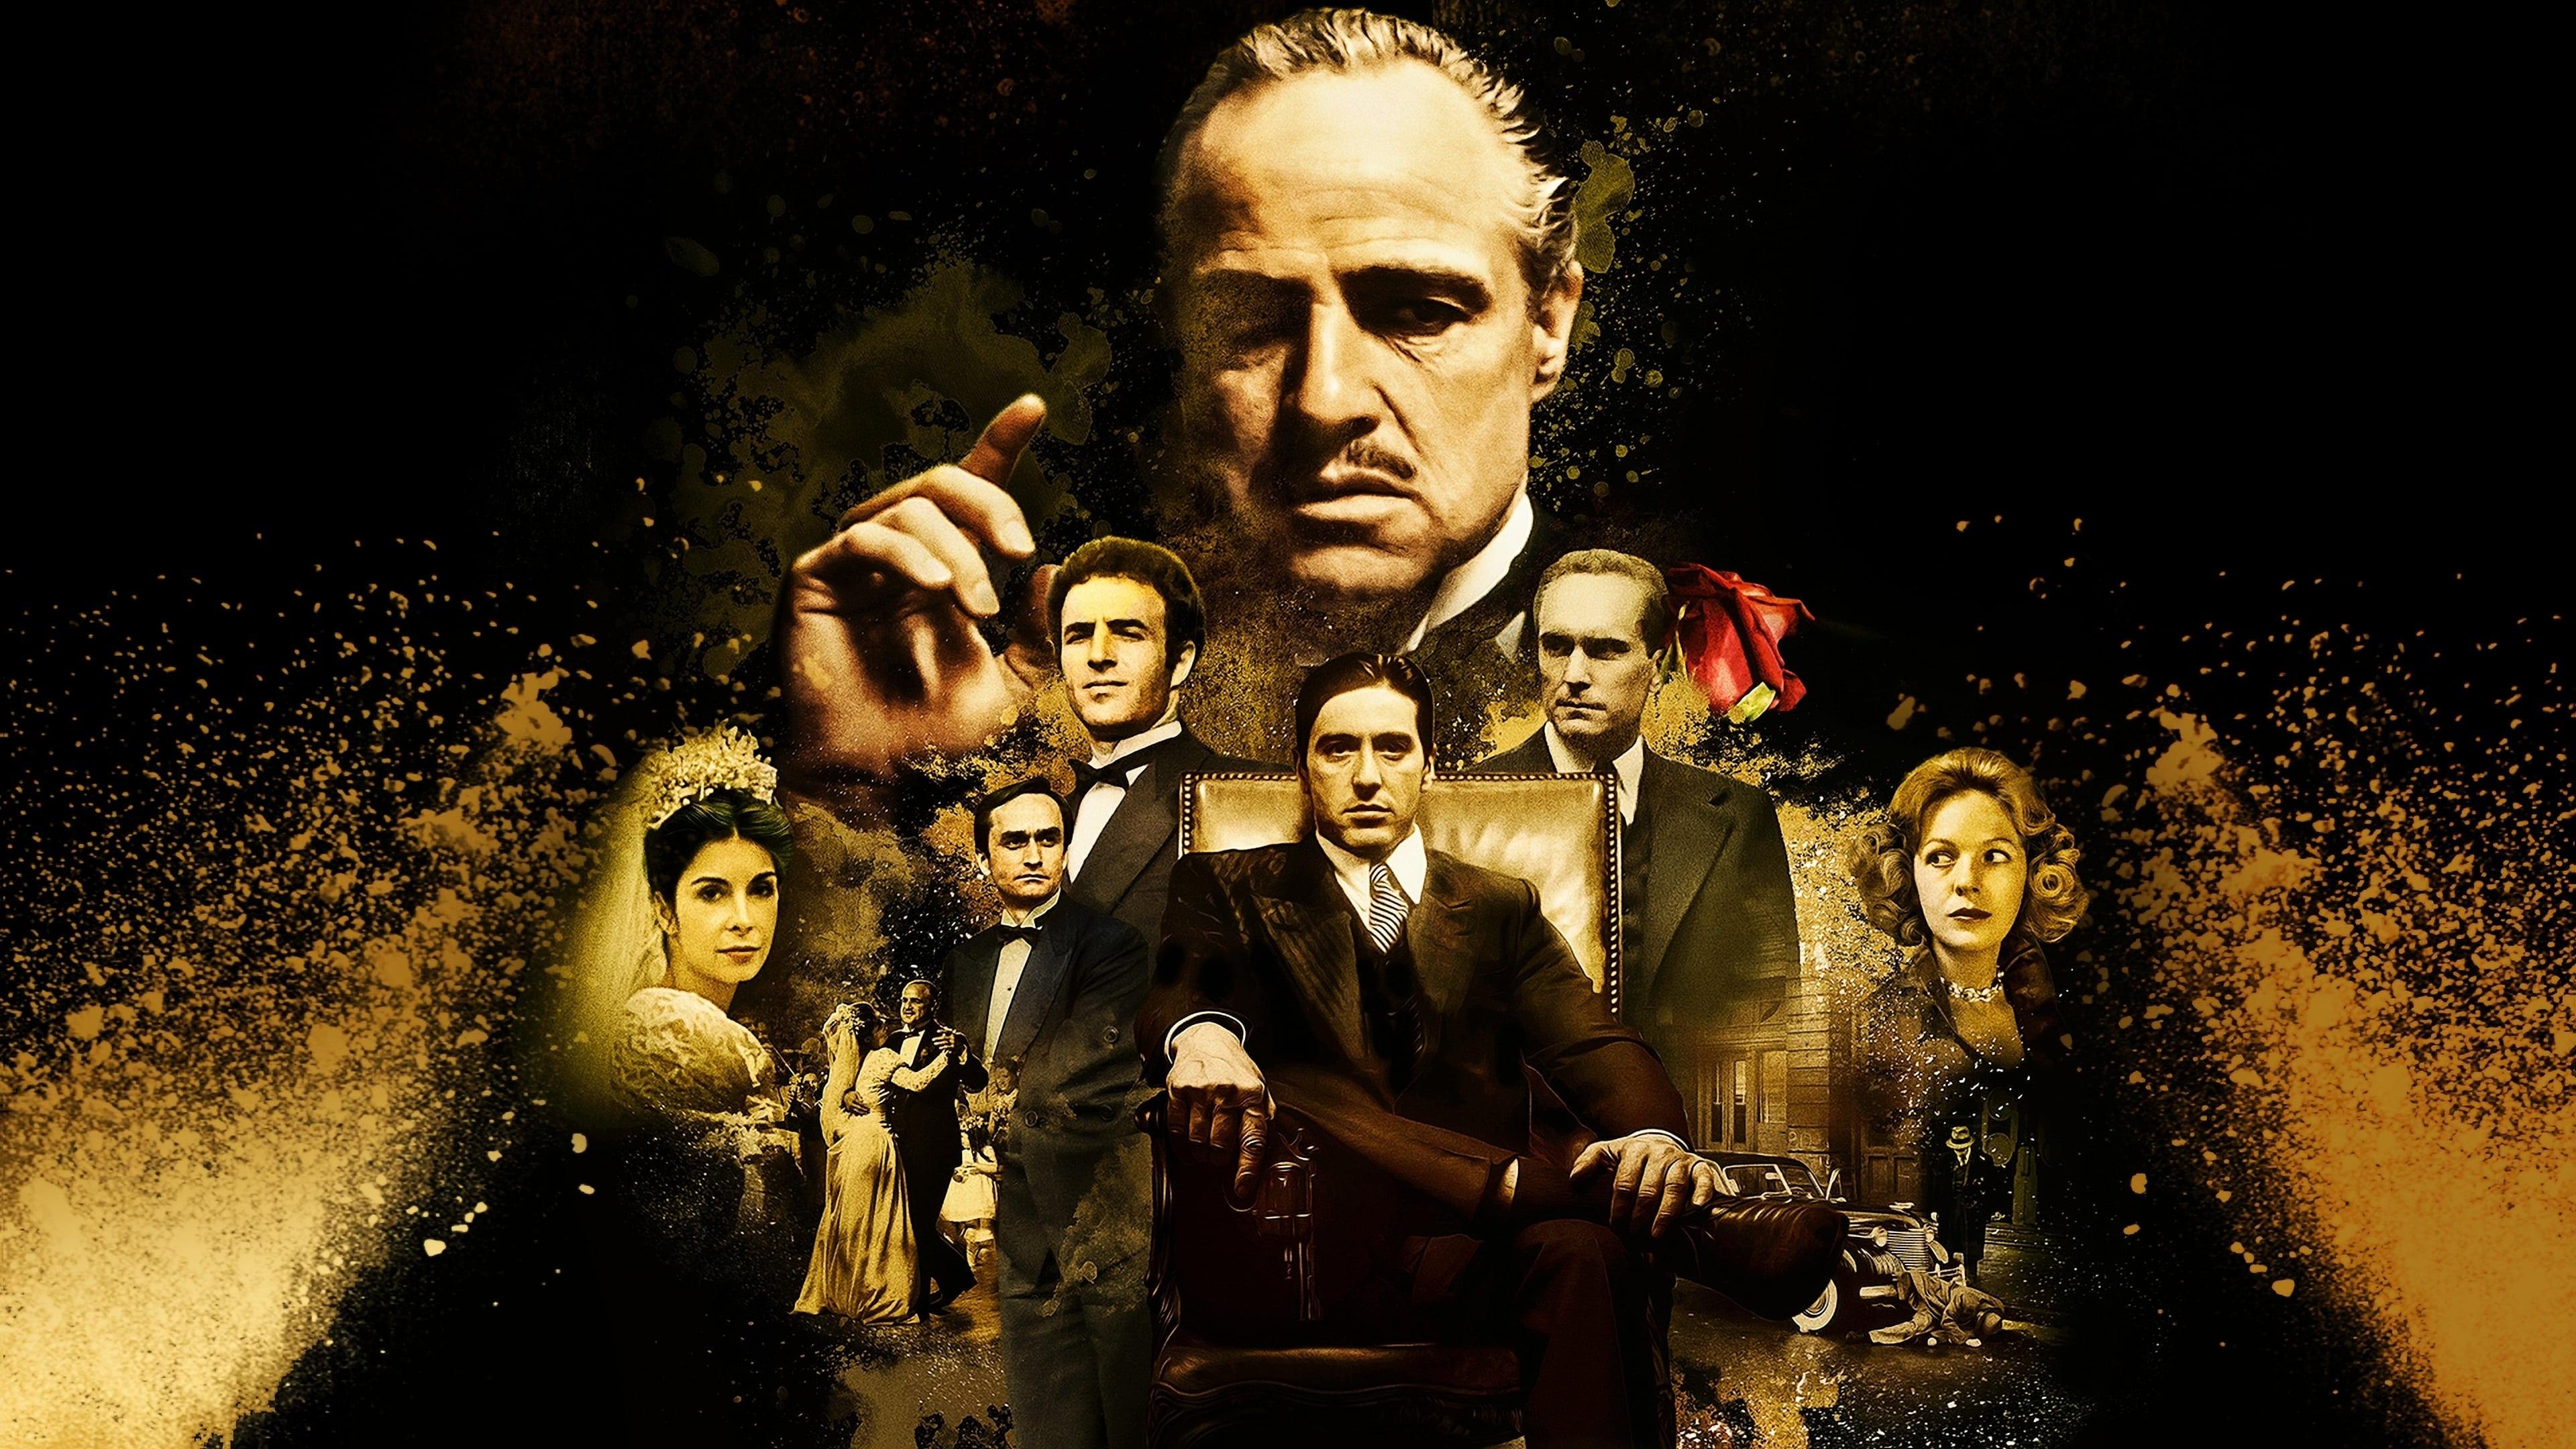 The Godfather 1901–1959: The Complete Epic backdrop